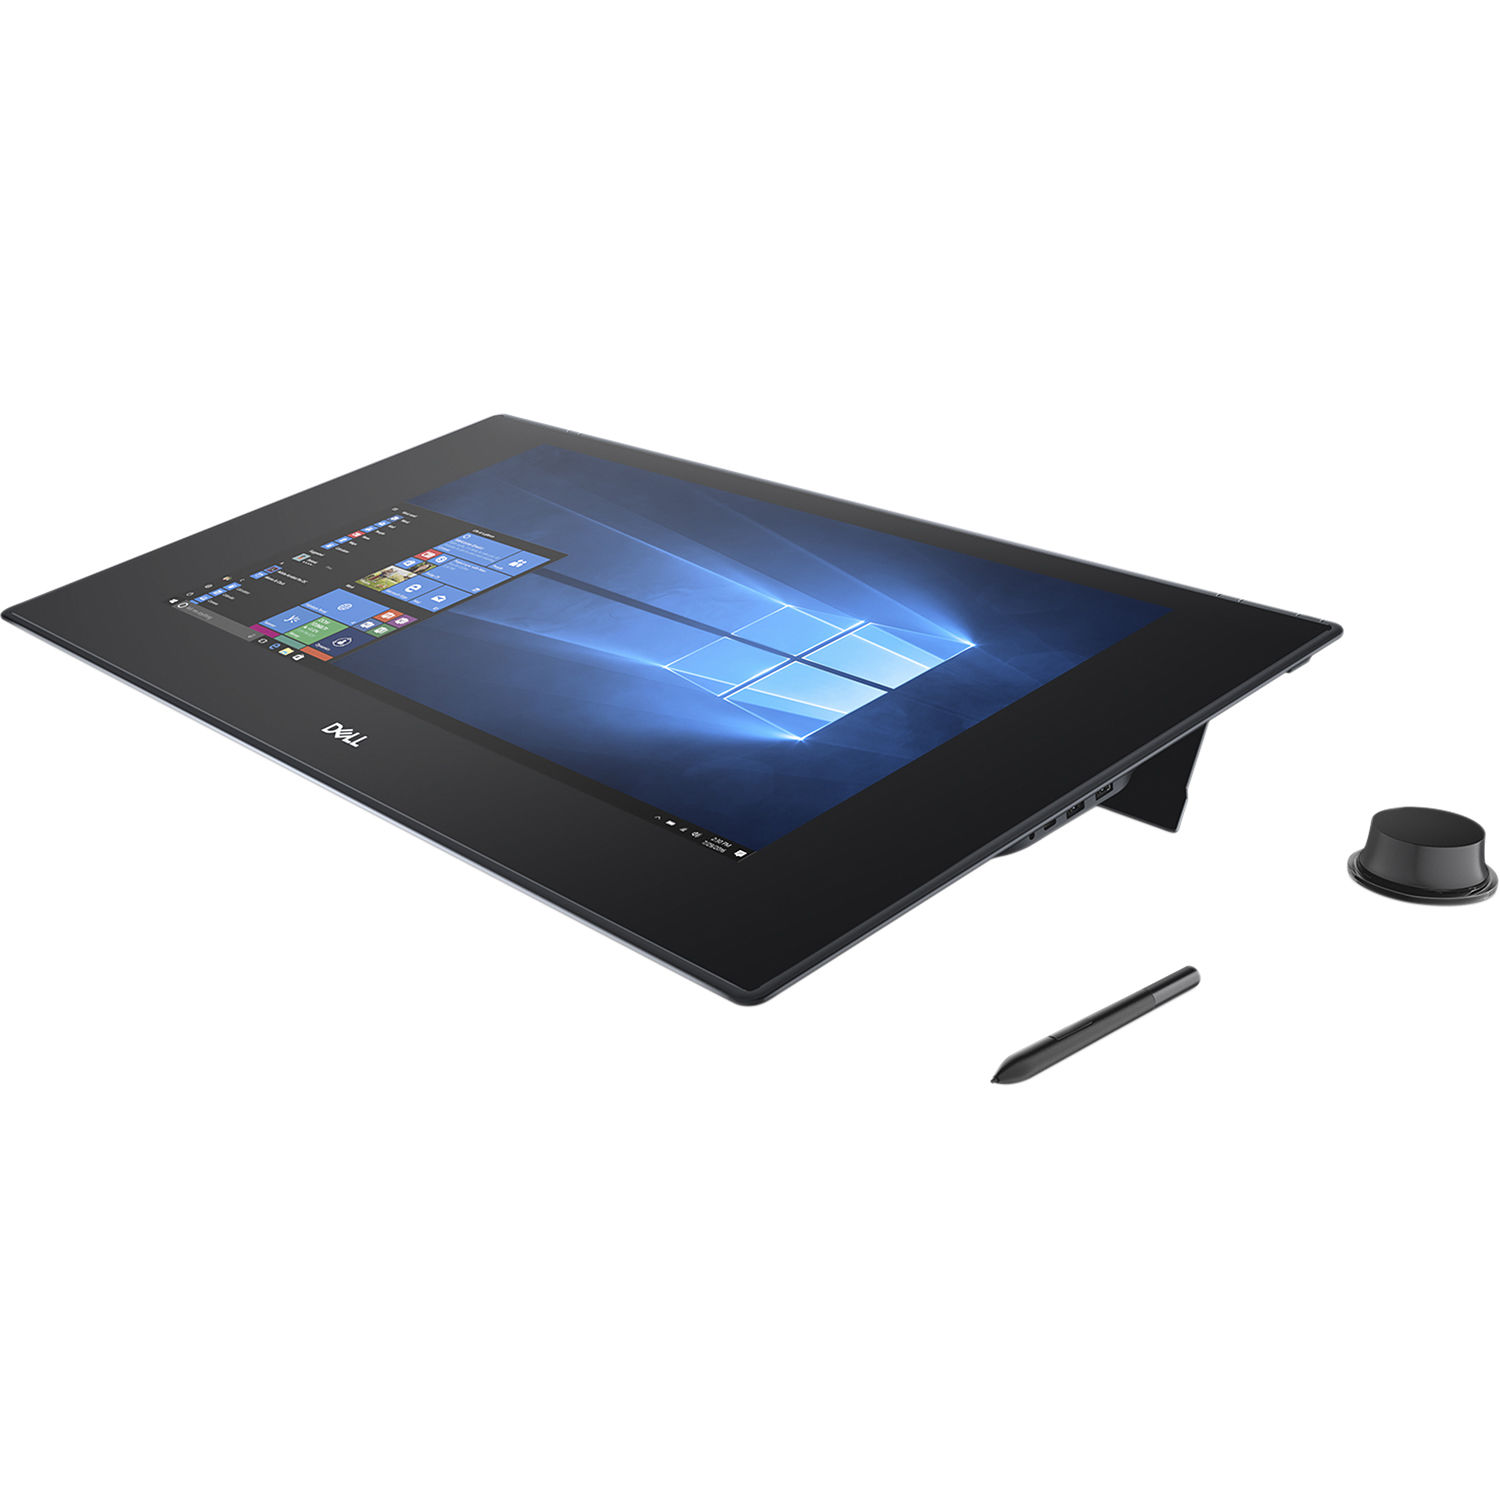 Dell Canvas 27 Pen Touch Graphics Tablet Sbr09 B H Photo